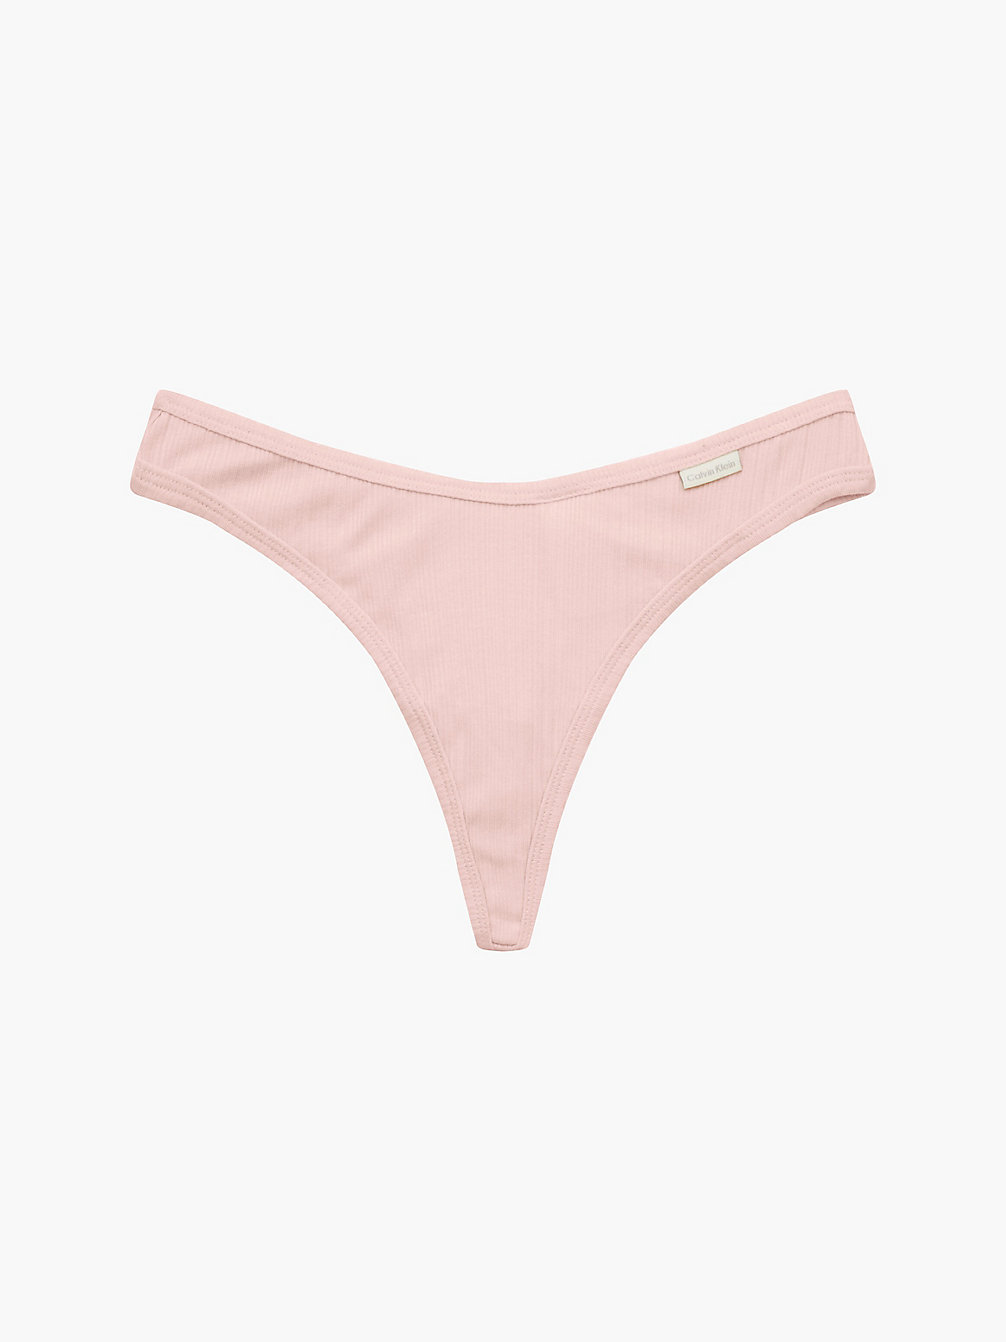 BARELY PINK > String - Pure Ribbed > undefined Damen - Calvin Klein